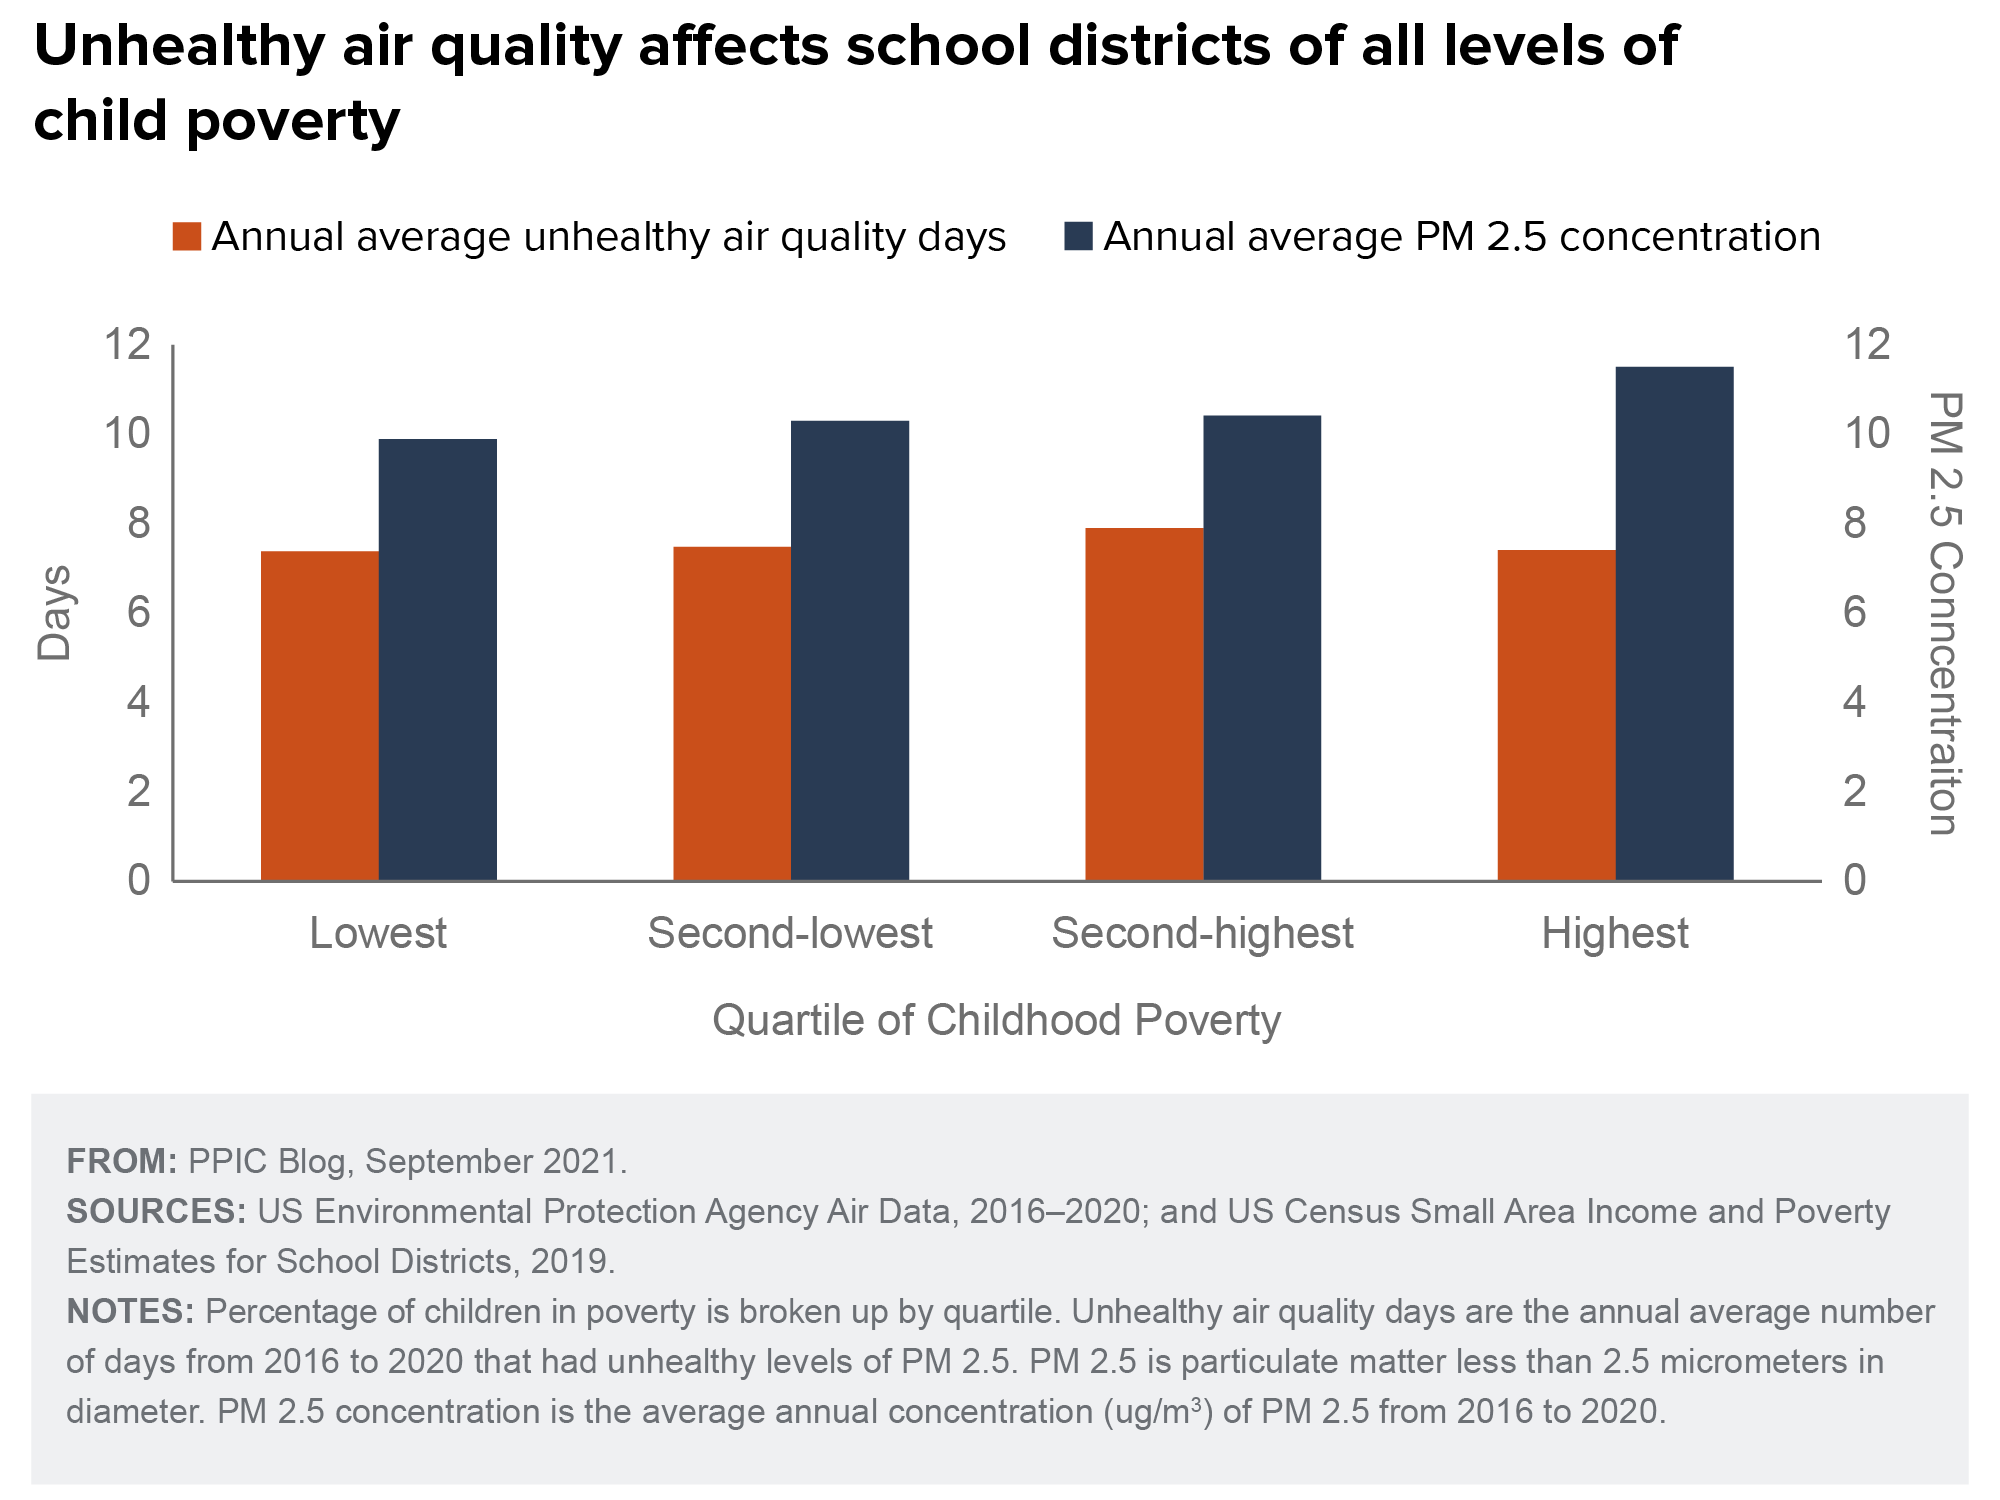 figure - Unhealthy air quality affects school districts of all levels of child poverty